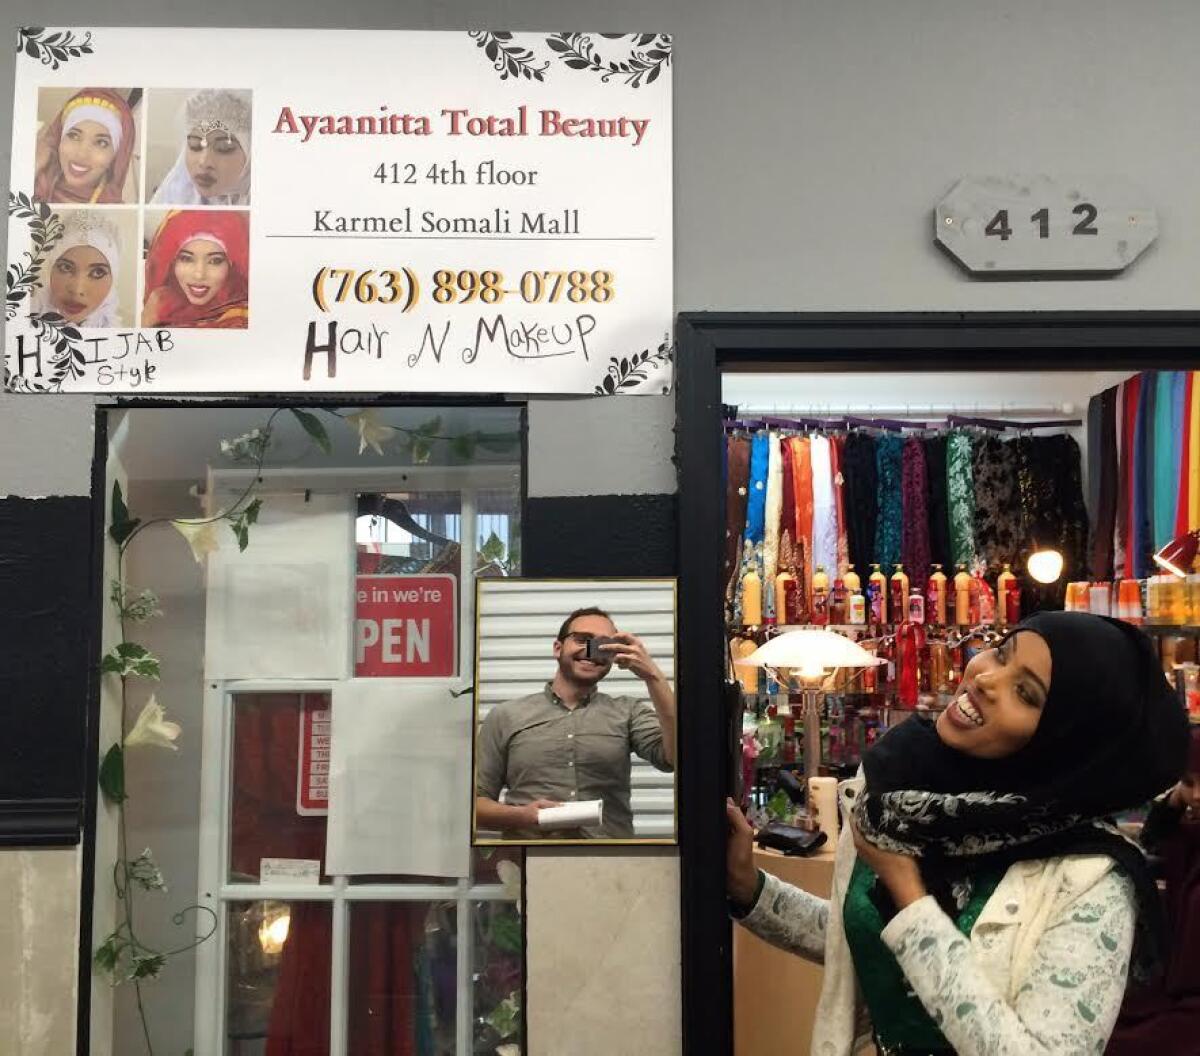 Ayan Aden poses in front of her beauty store in Minneapolis.